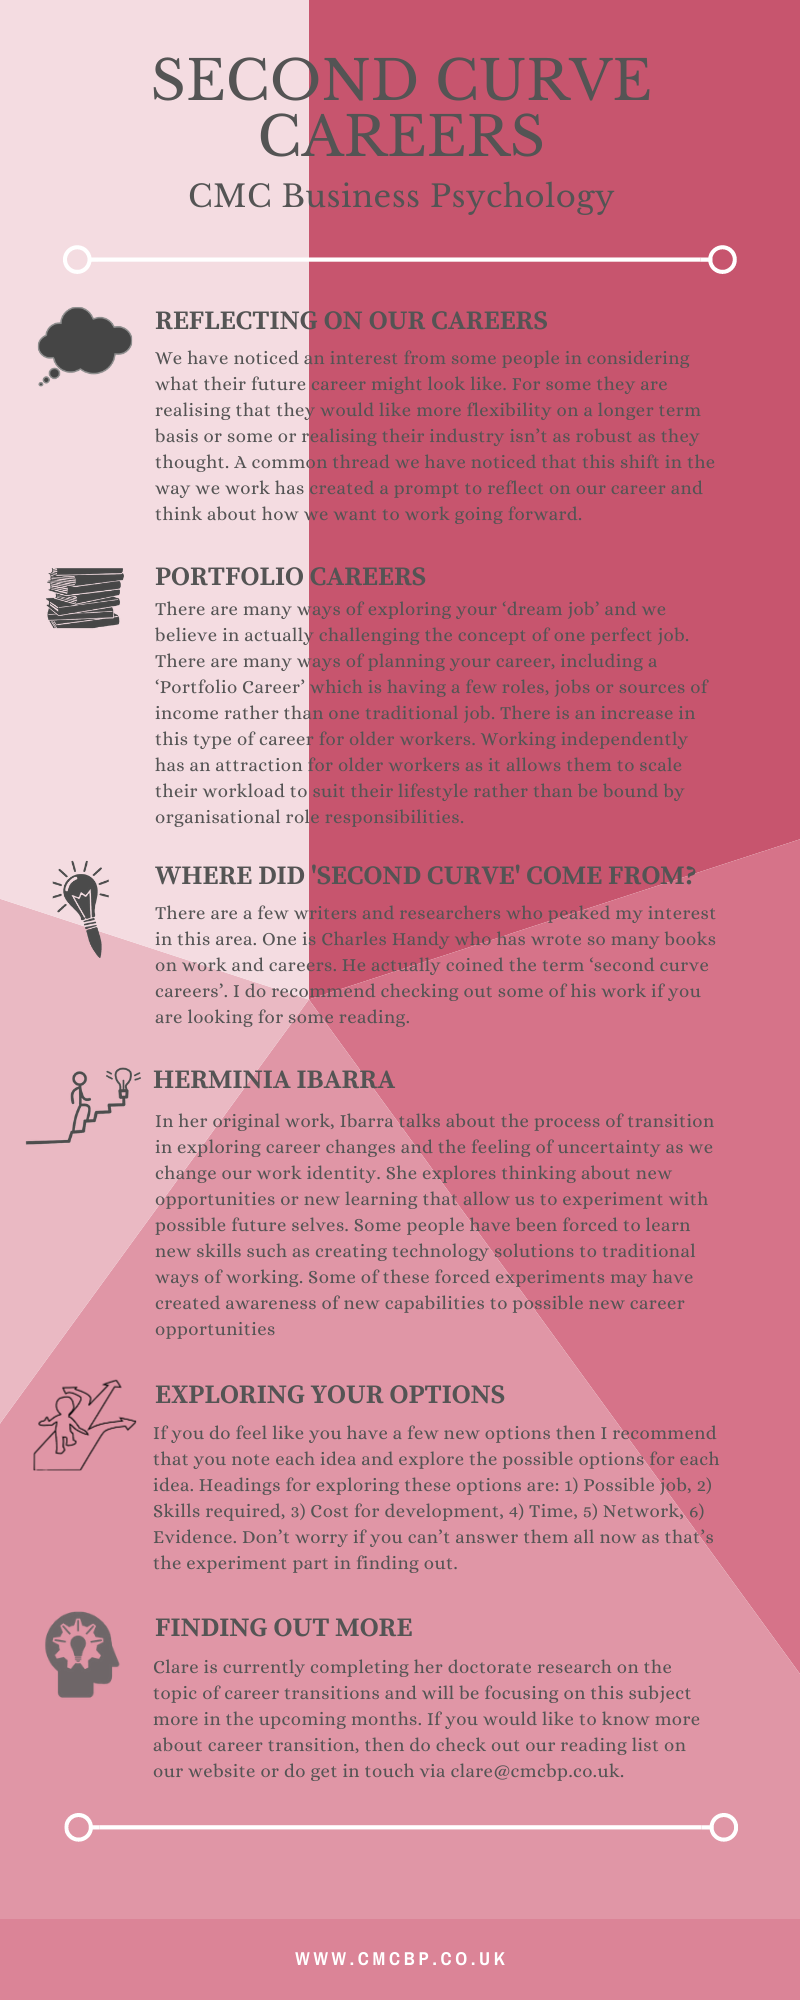 Second Curve Careers Infographic